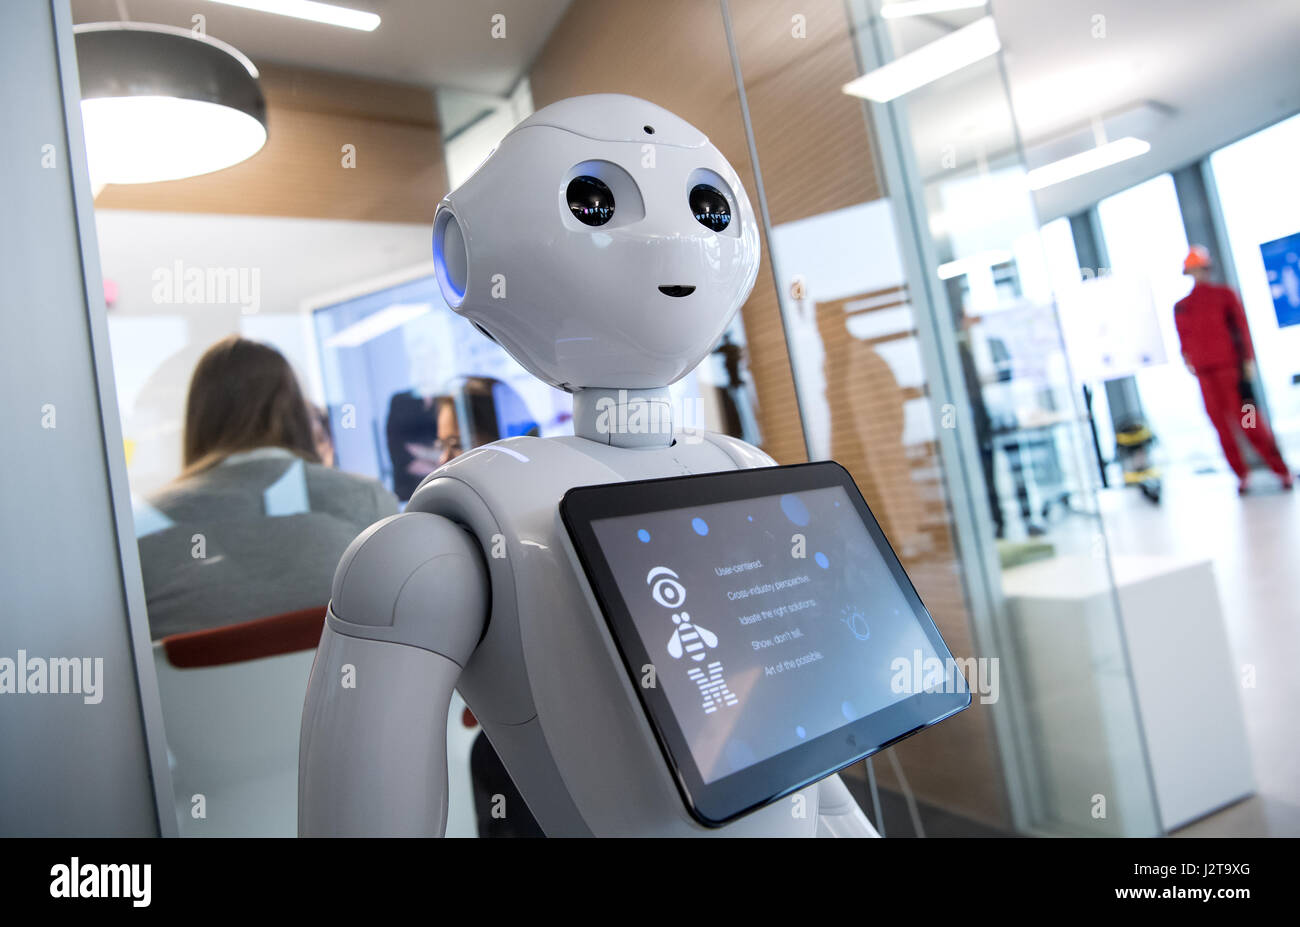 Munich, Germany. 26th Apr, 2017. The robot 'Pepper' can be seen at a showroom in the headquarters of IBM in Munich, Germany, 26 April 2017. Pepper is a humanoid robot programmed to analyse people's facial expressions and gestures. Photo: Sven Hoppe/dpa/Alamy Live News Stock Photo